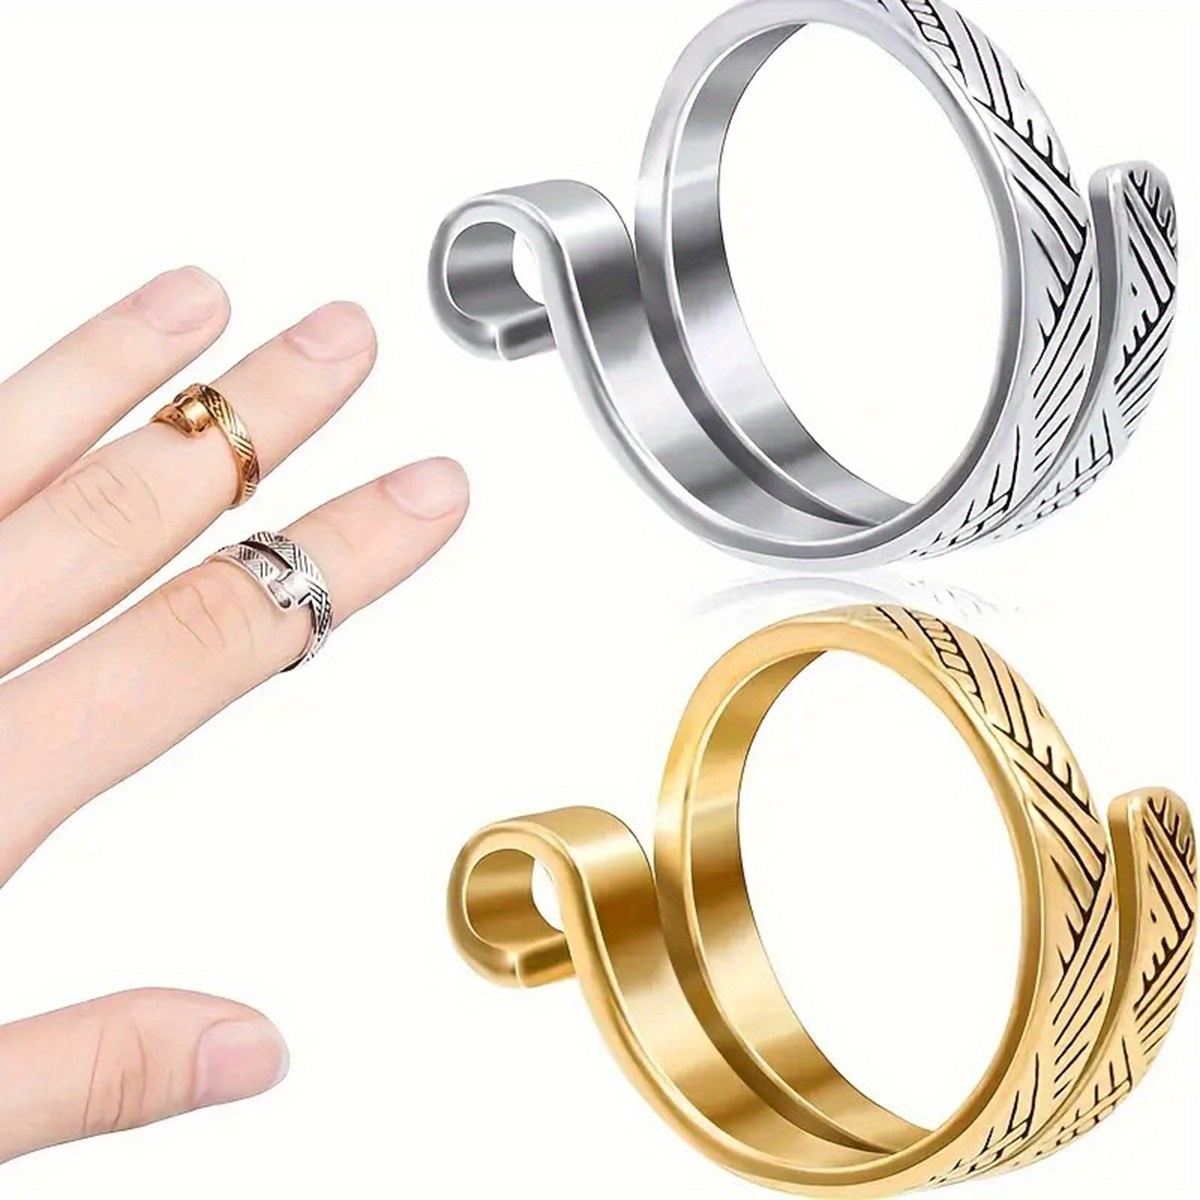 Gozadera upgraded 3 pcs crochet ring for finger yarn guide, adjustable tension  ring for crocheting, finger pain release and faster kni